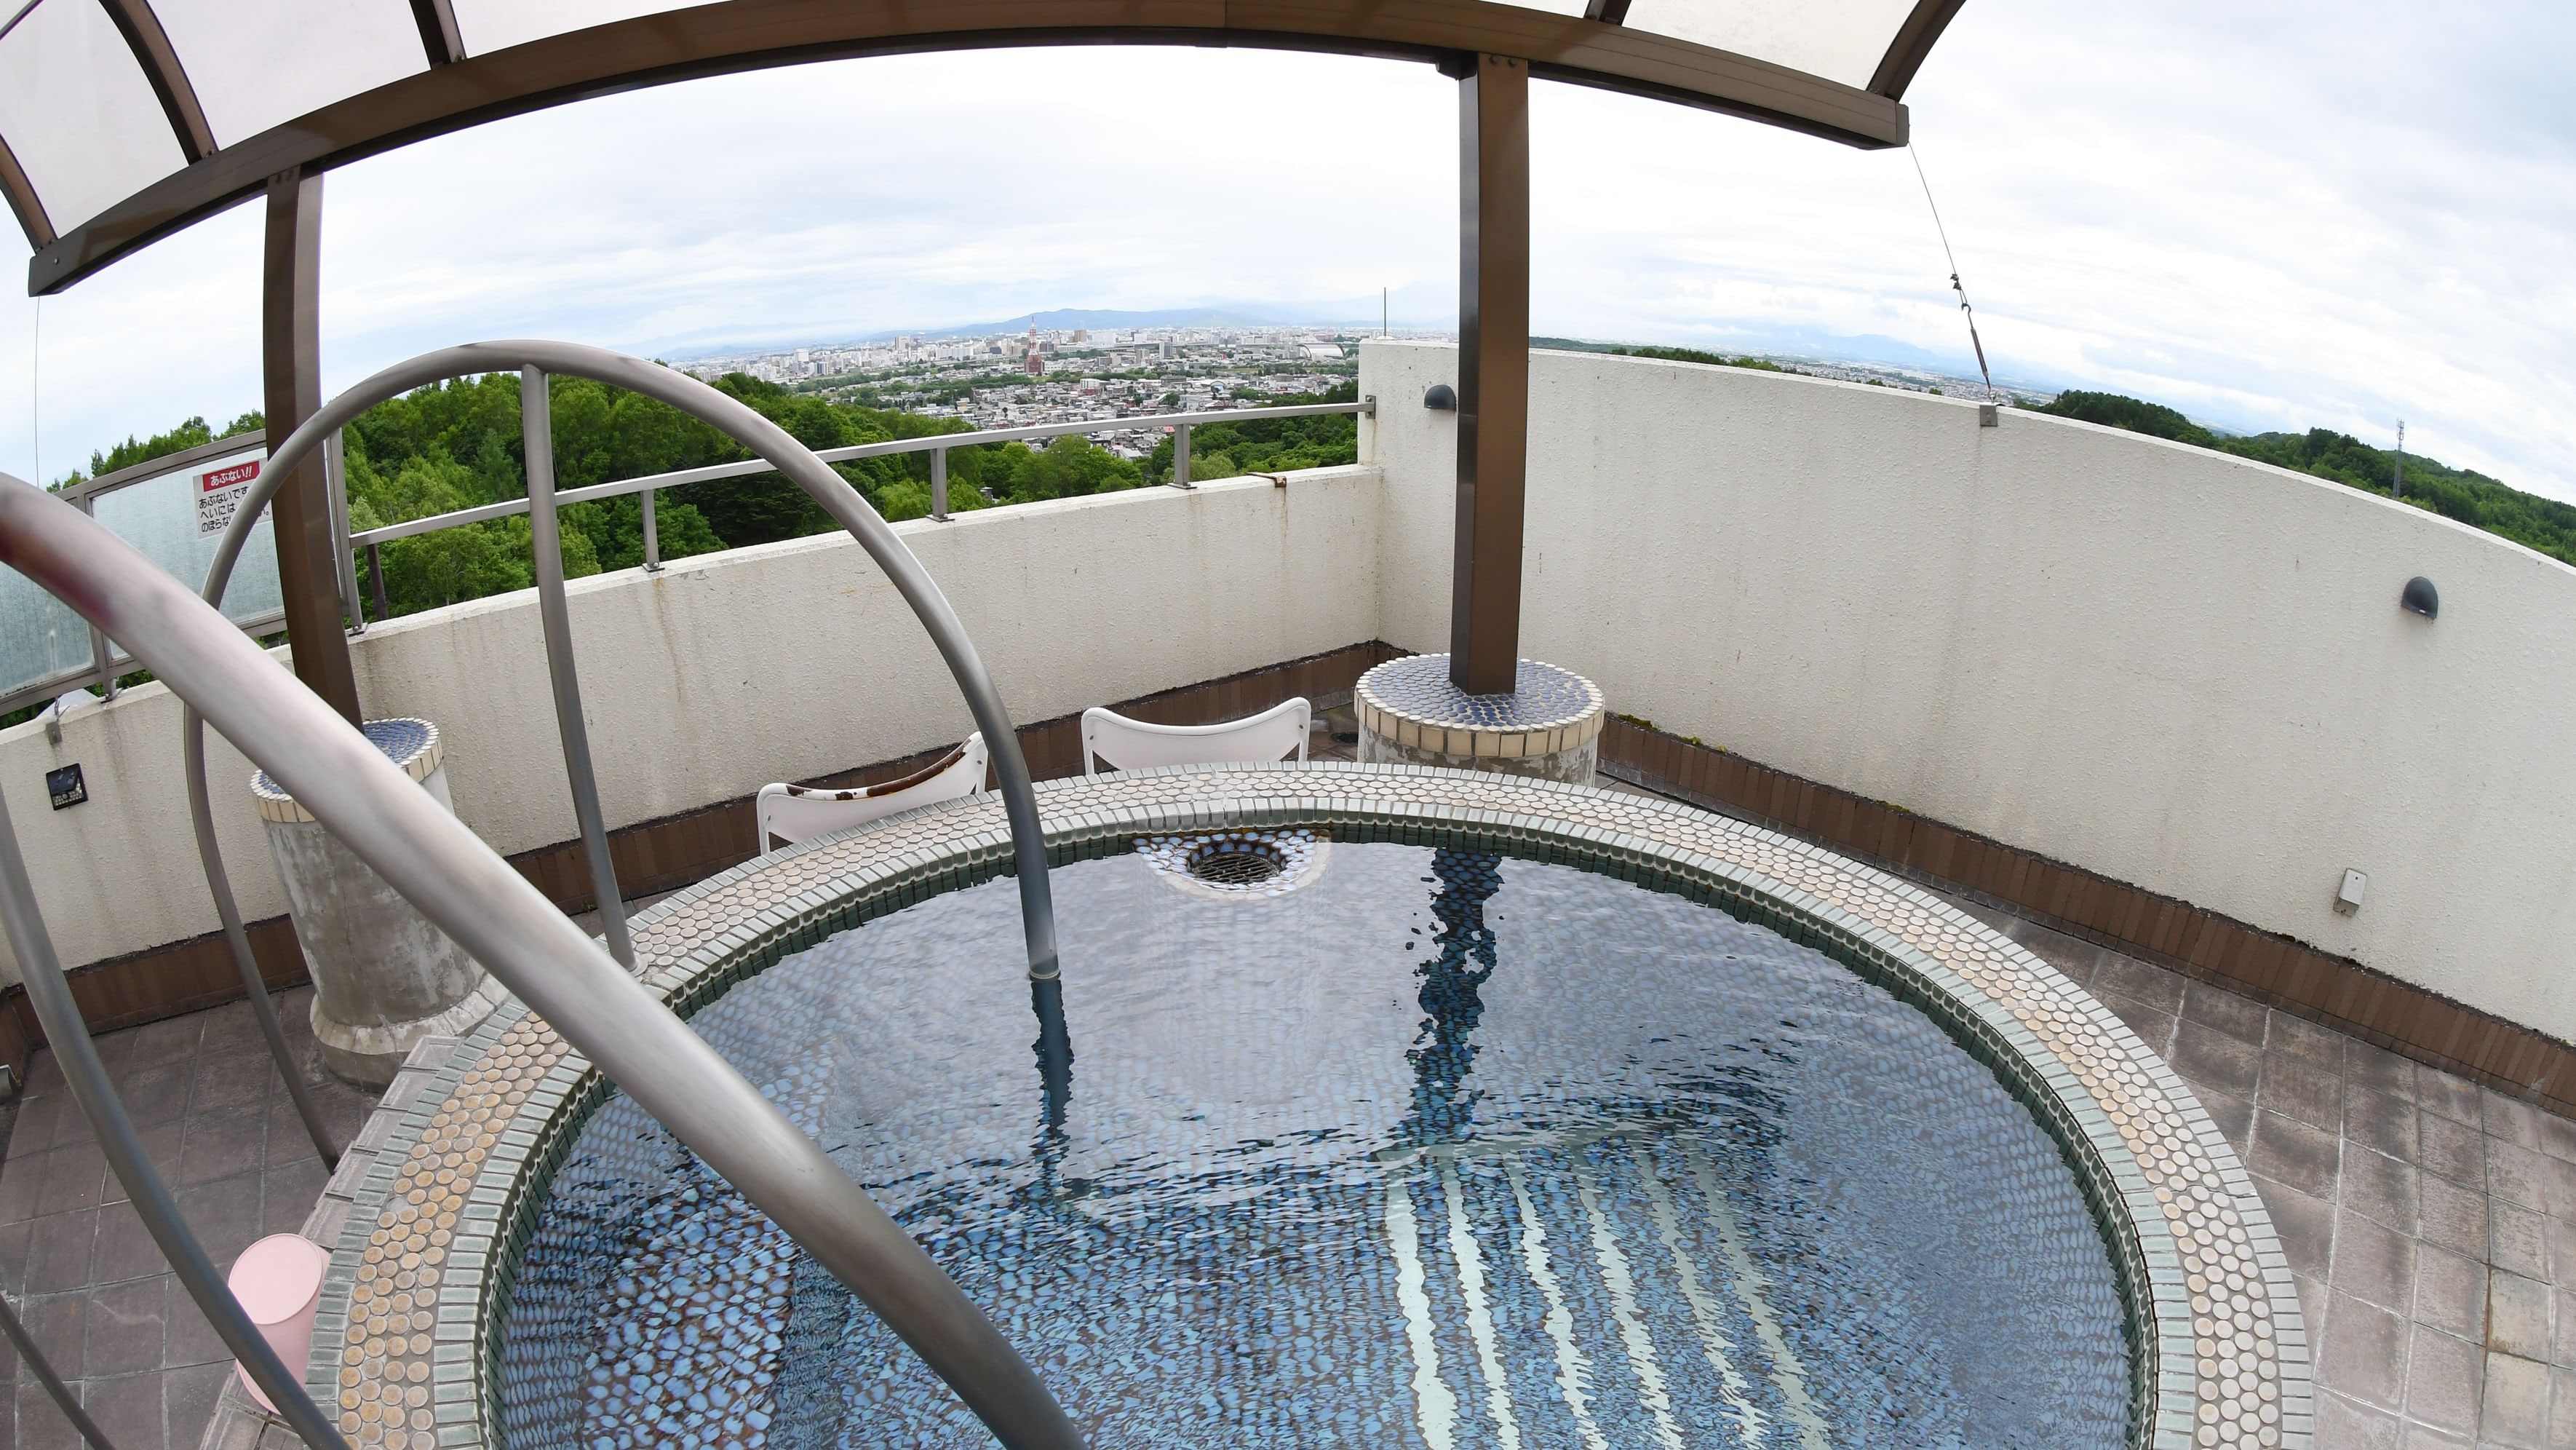 ◆ Open-air bath with a view of the special room You can see the night view at night, which is recommended!